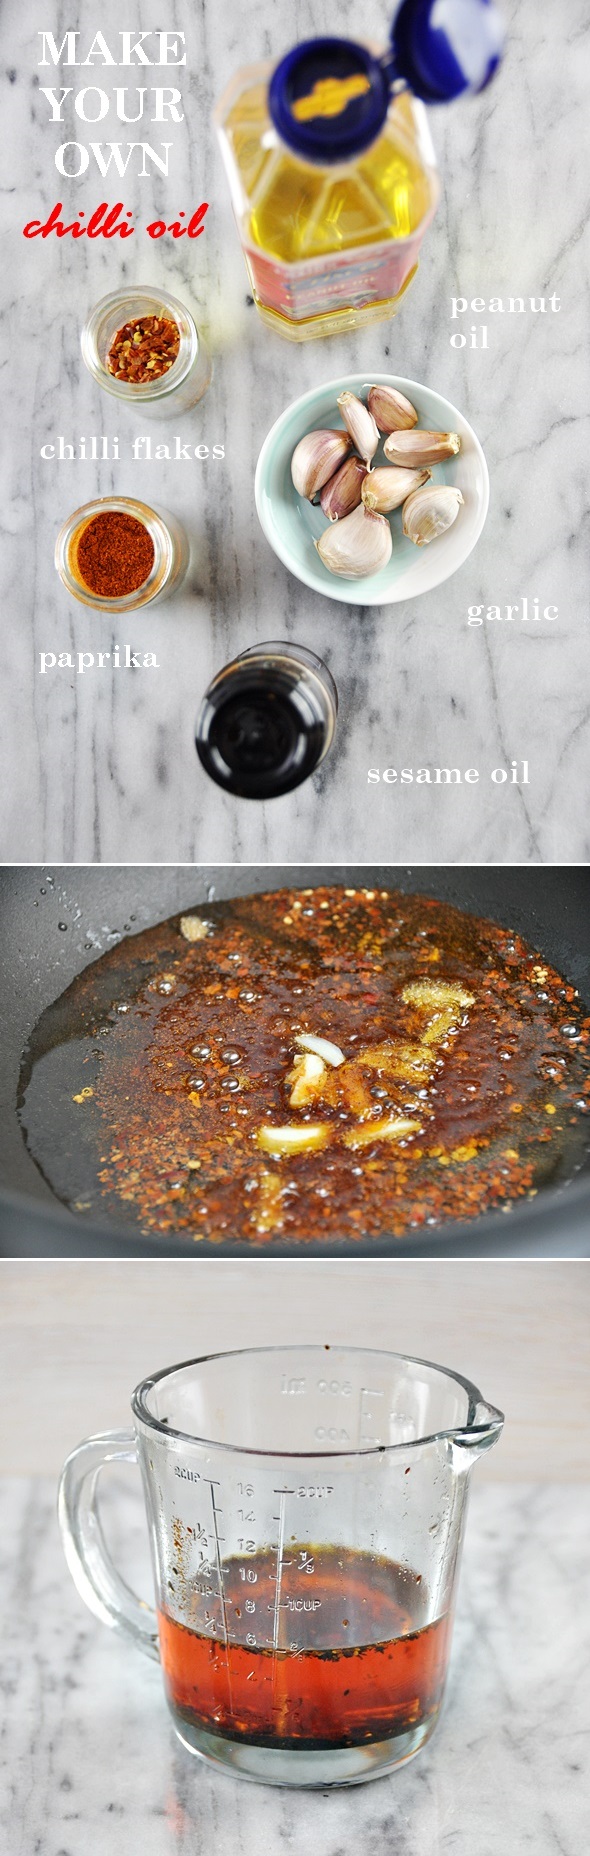 How to Make Your Own Chili Oil – Mike's Mighty Good